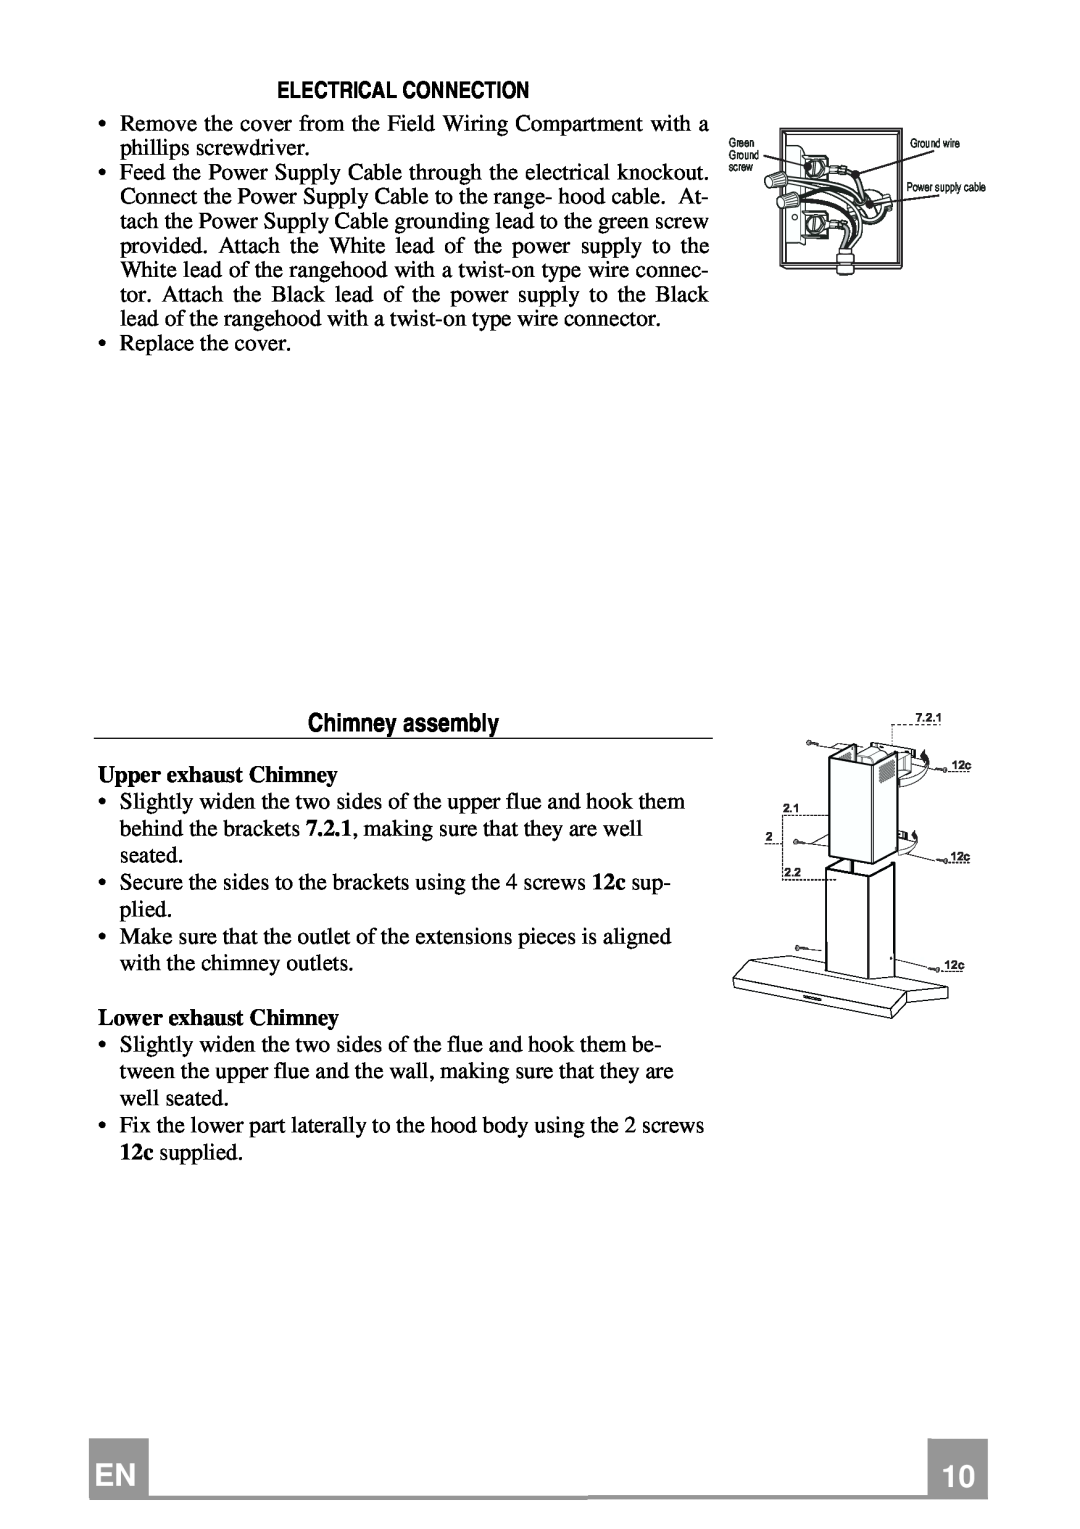 Franke Consumer Products FCH 367 Chimney assembly, Electrical Connection, Upper exhaust Chimney, Lower exhaust Chimney 